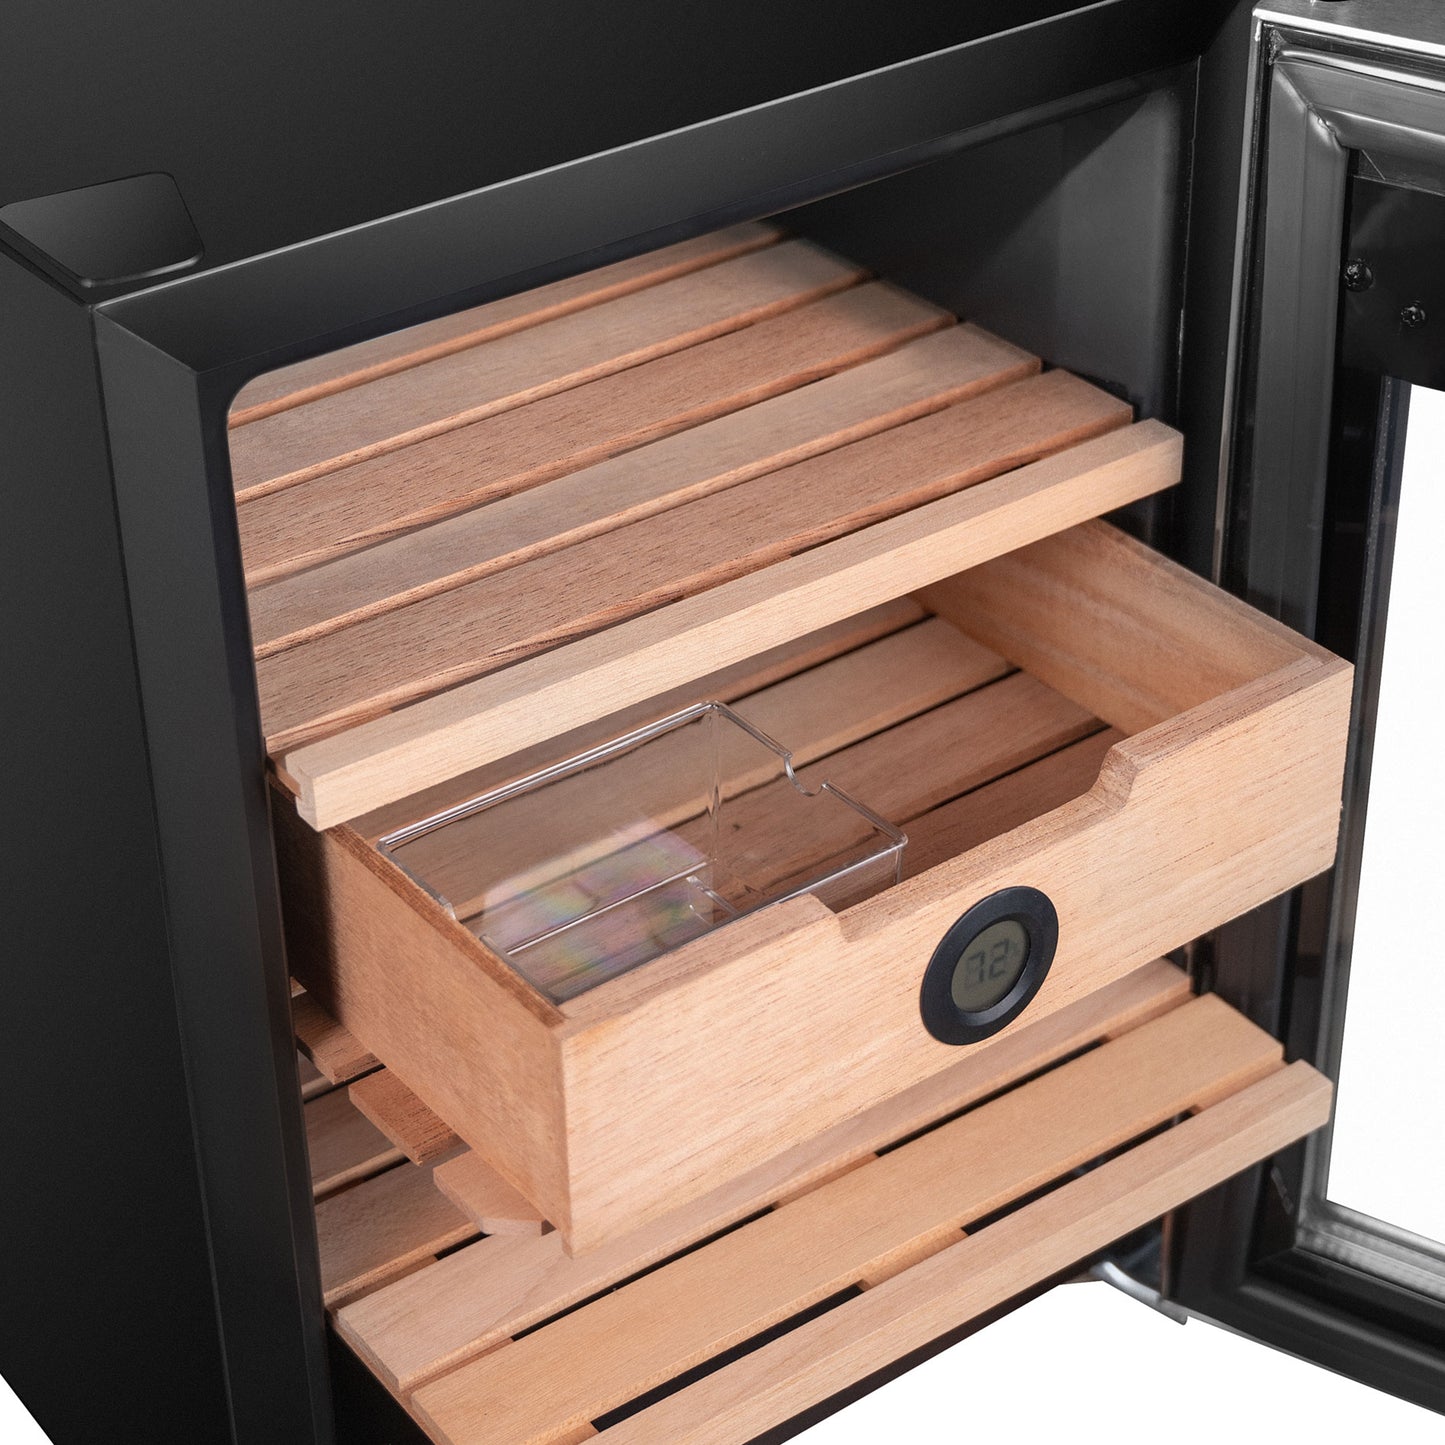 Buy a Whynter 1.2 cu. ft. Stainless Steel Digital Control and Display Cigar Humidor with Spanish Cedar Shelves by Chilled Beverages